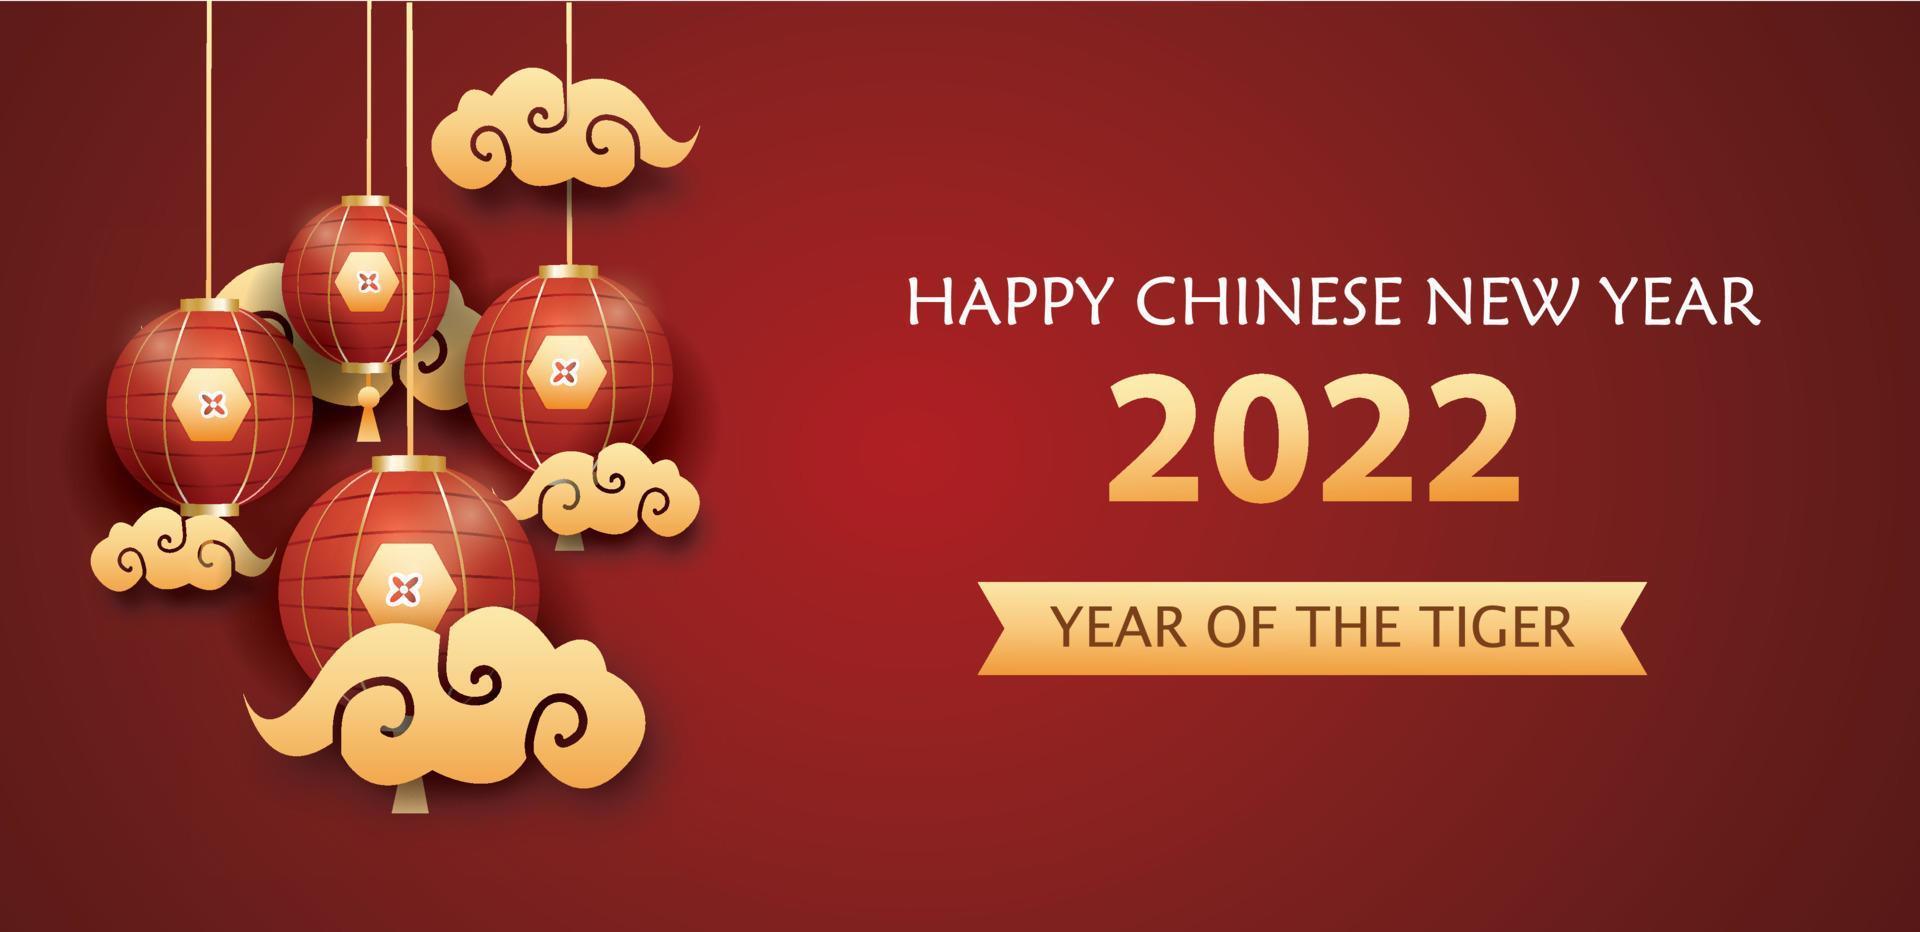 Chinese new year 2022 banner vector